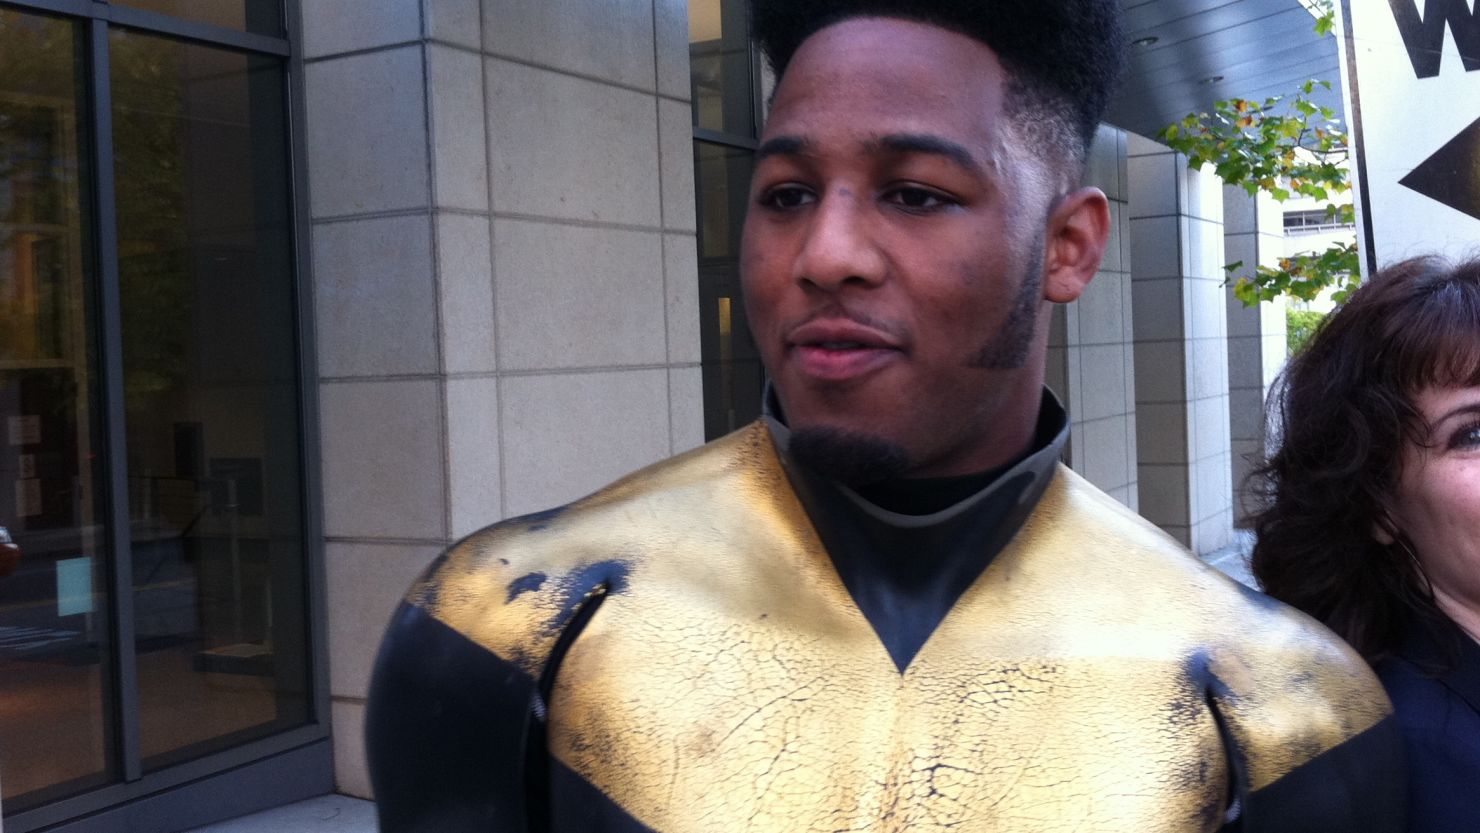 Phoenix Jones, whose real name is Ben Fodor, unmasked himself after prosecutors declined to press assault charges.